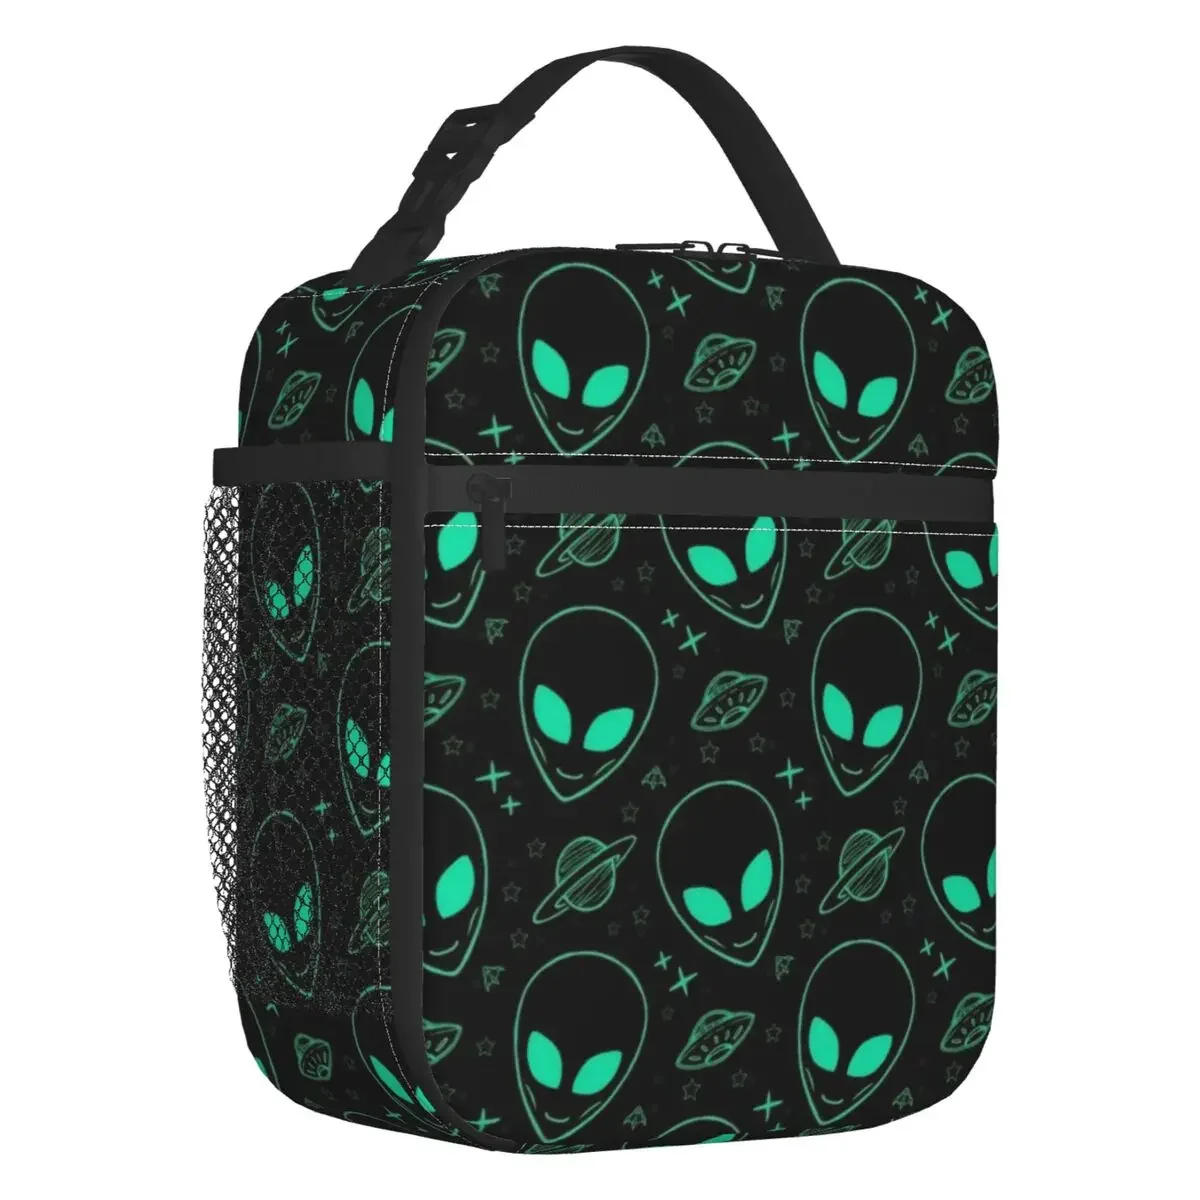 

Alien and UFO Space Star Pattern Insulated Lunch Tote Bag for Women Resuable Cooler Thermal Bento Box Kids School Children